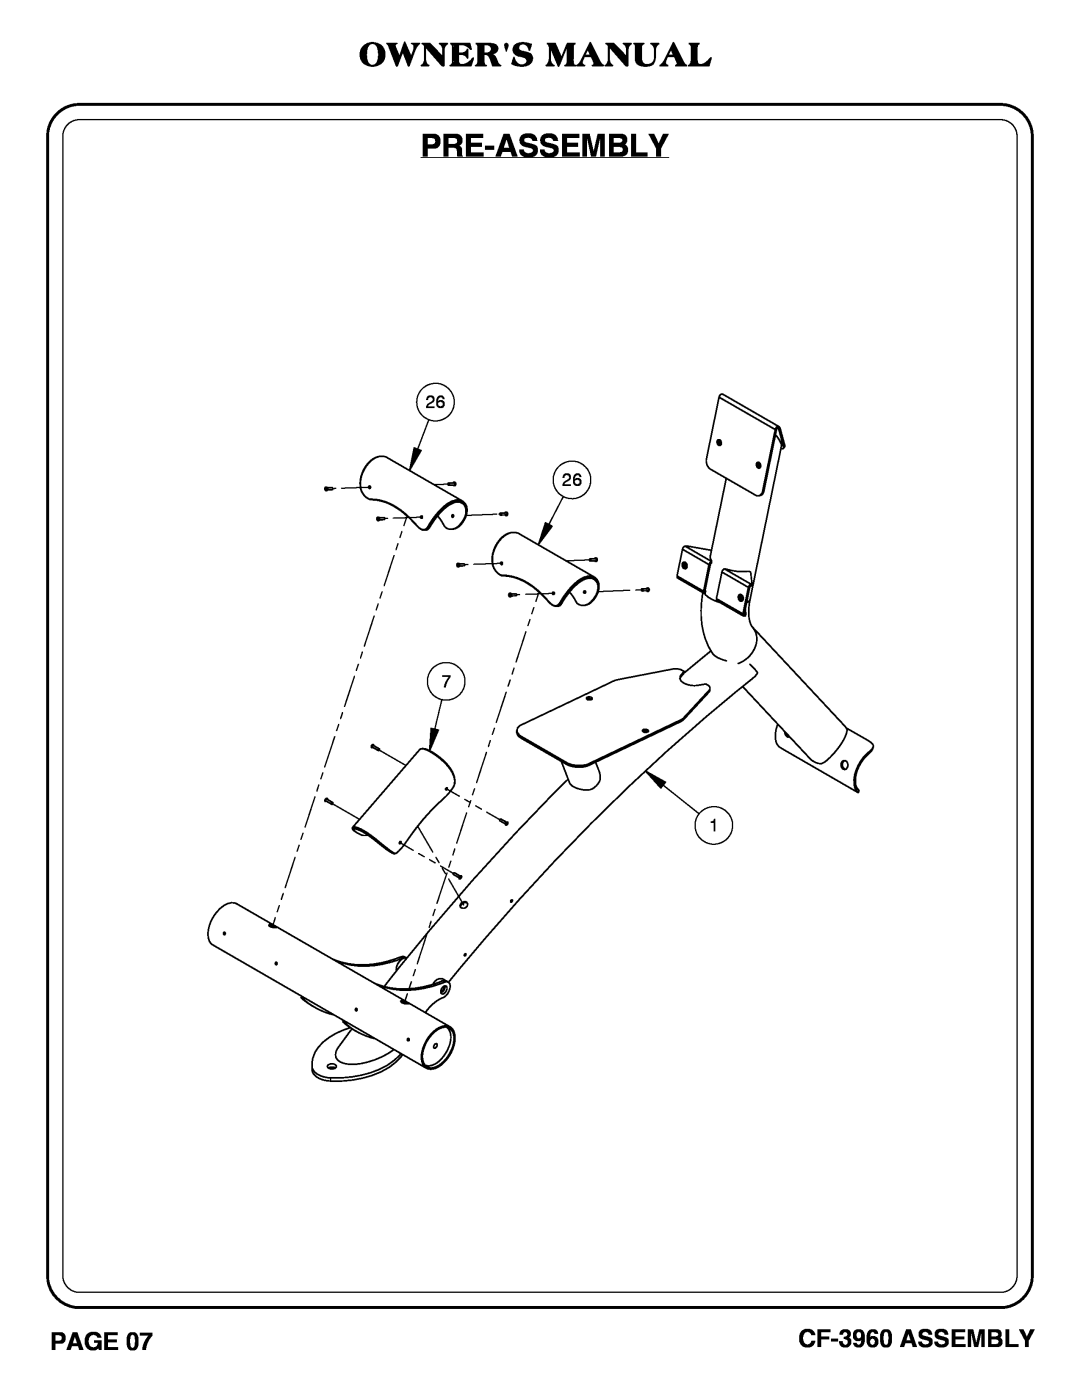 Hoist Fitness owner manual Owners Manual Pre-Assembly, Page, CF-3960 ASSEMBLY 